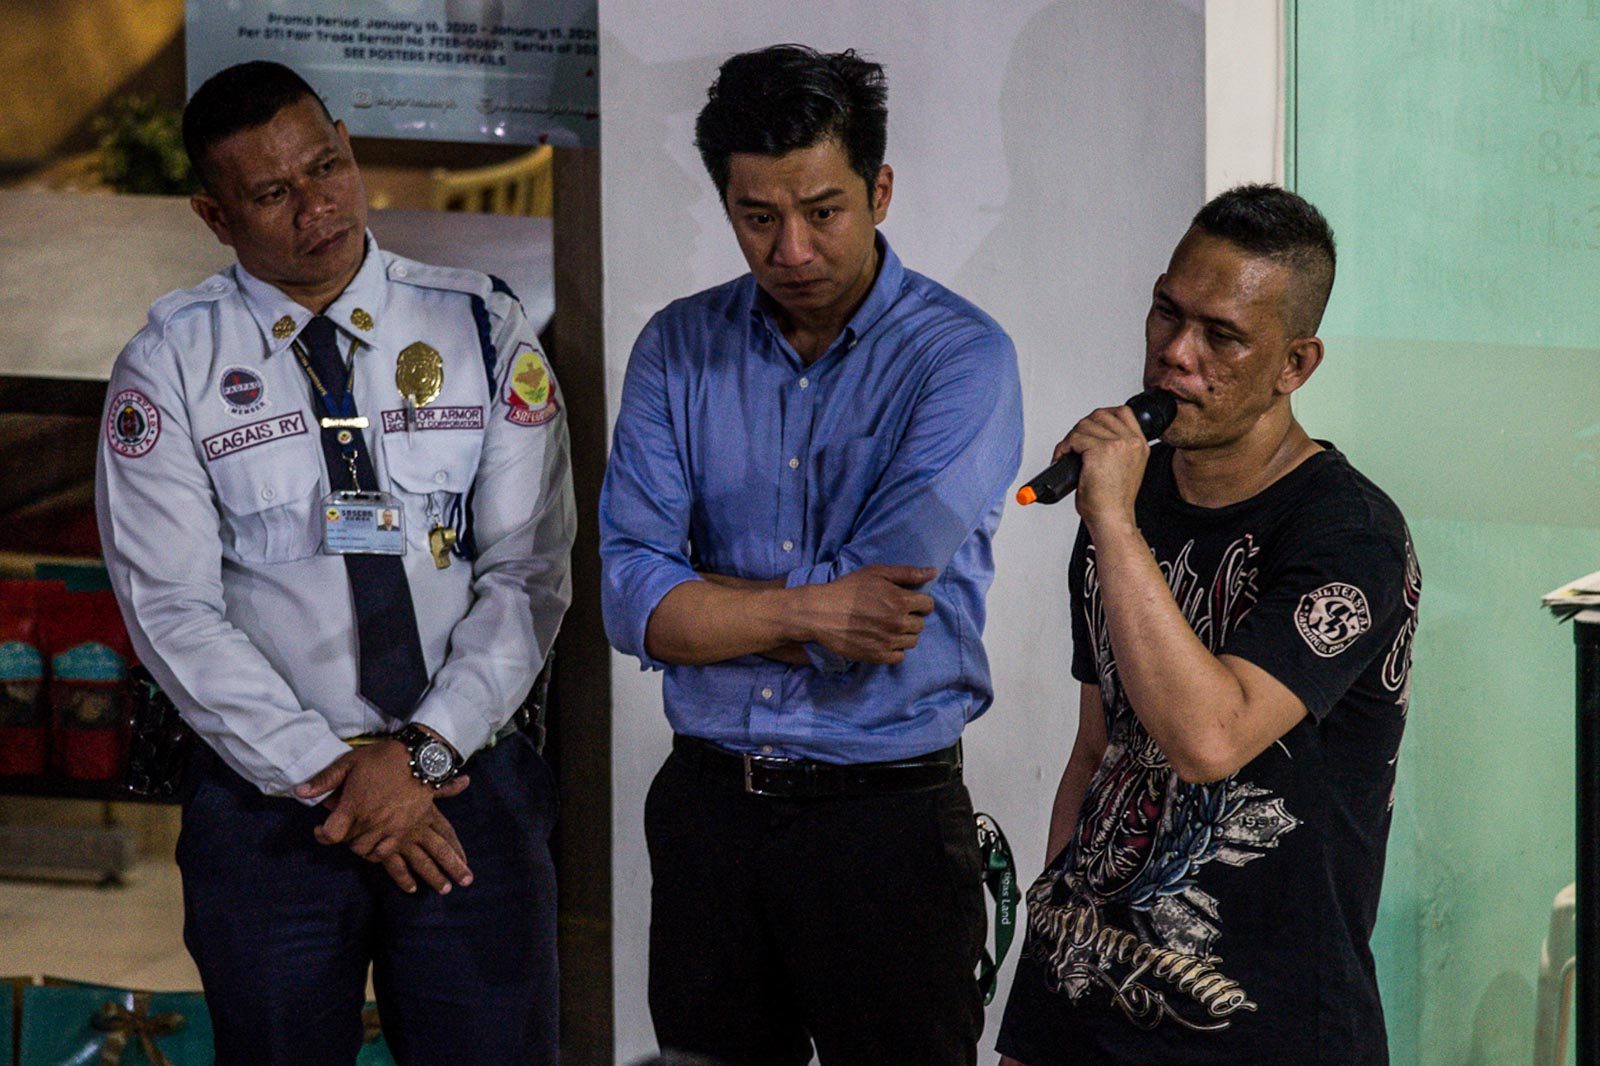 Greenhills hostage taker has ‘no record’ of being accredited as guard – PNP